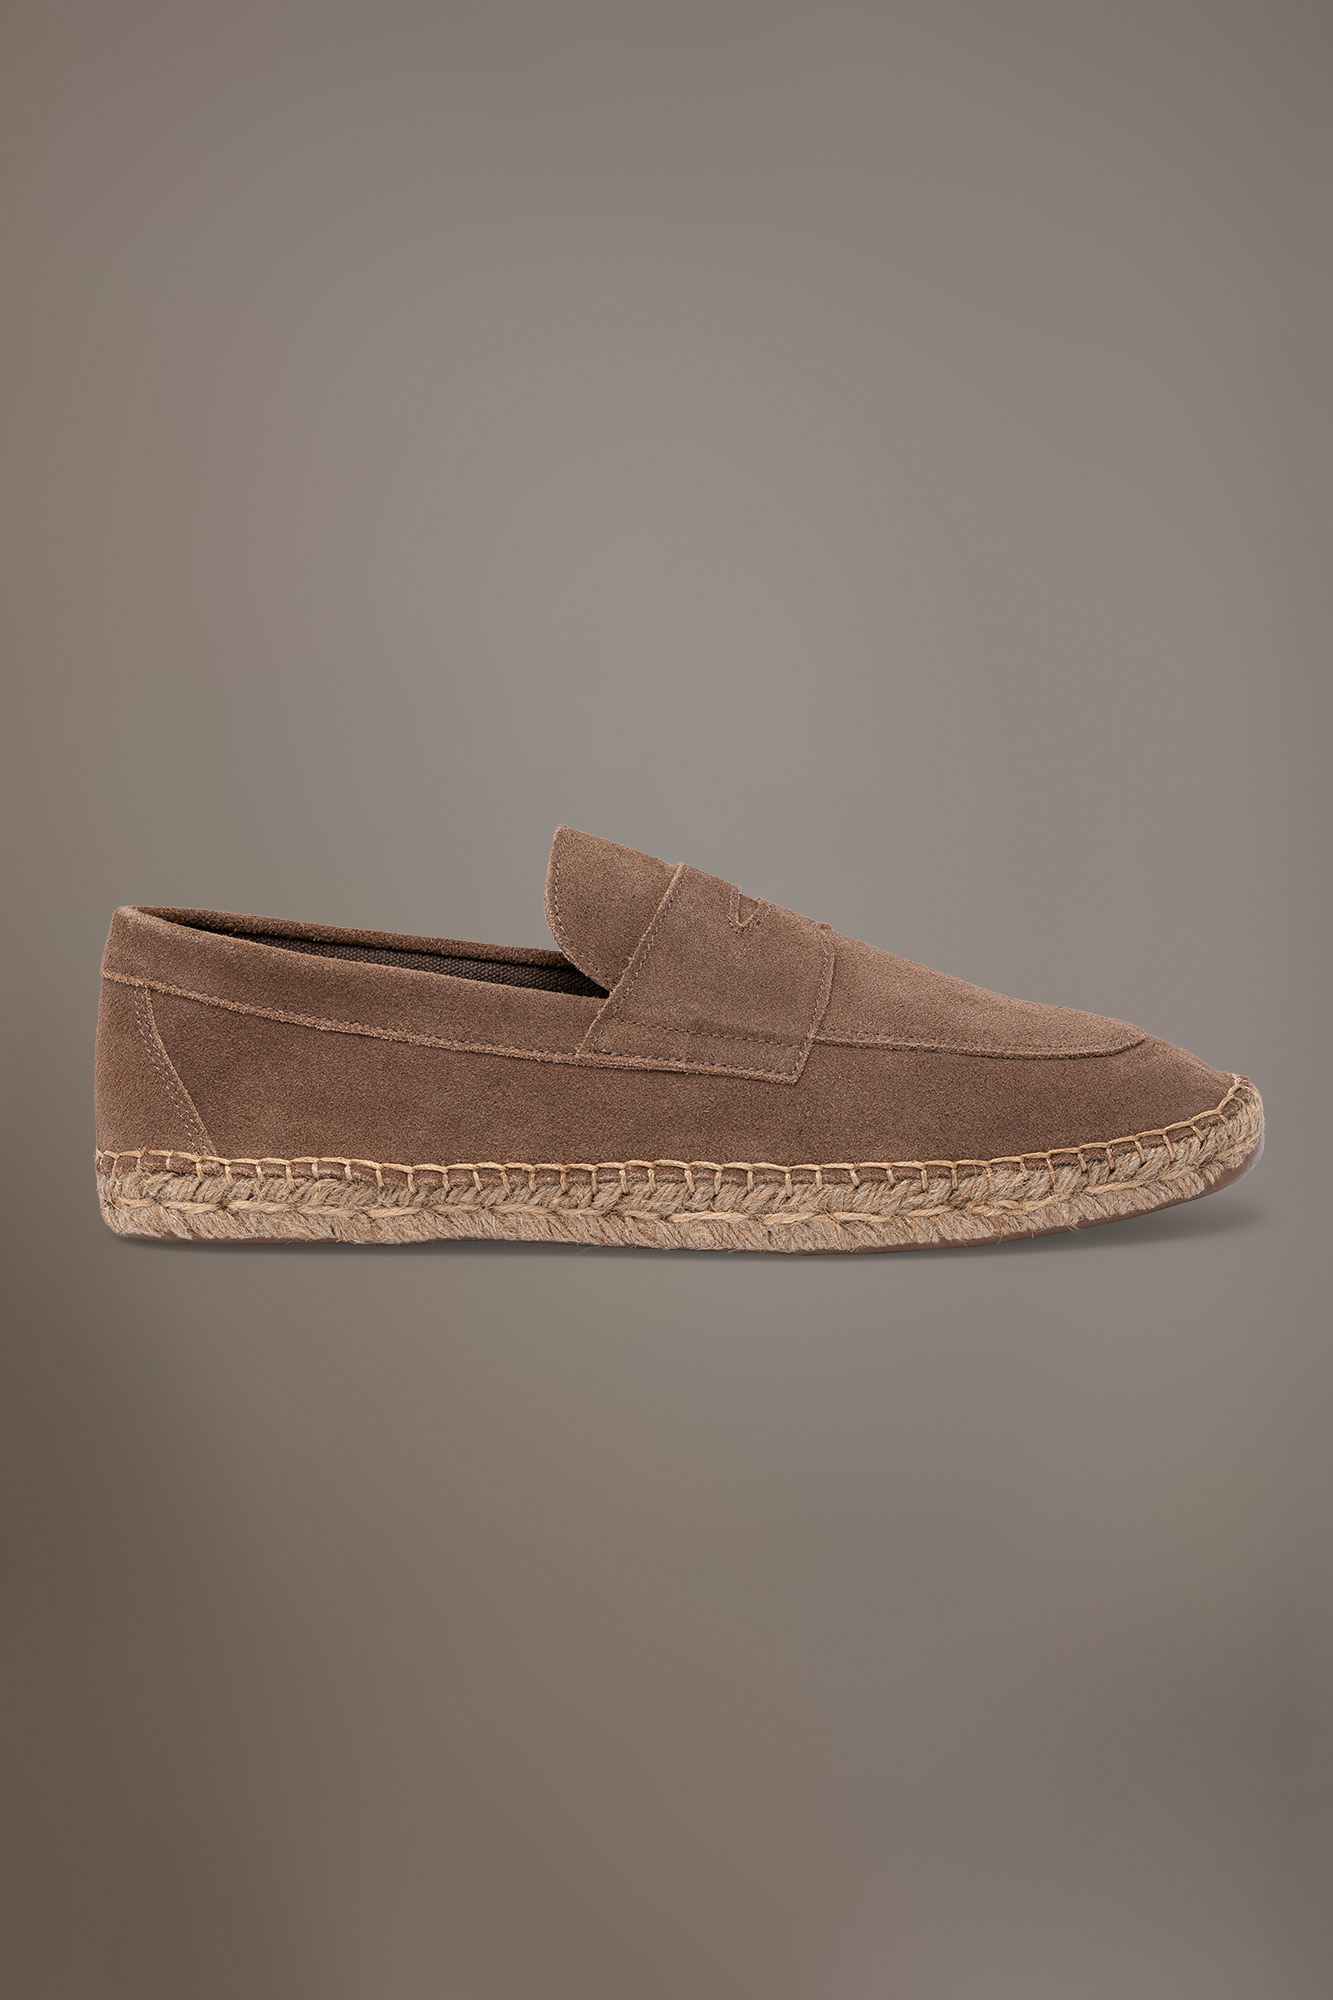 Suede espadrillas shoes 100% leather with rubber and cord sole image number null